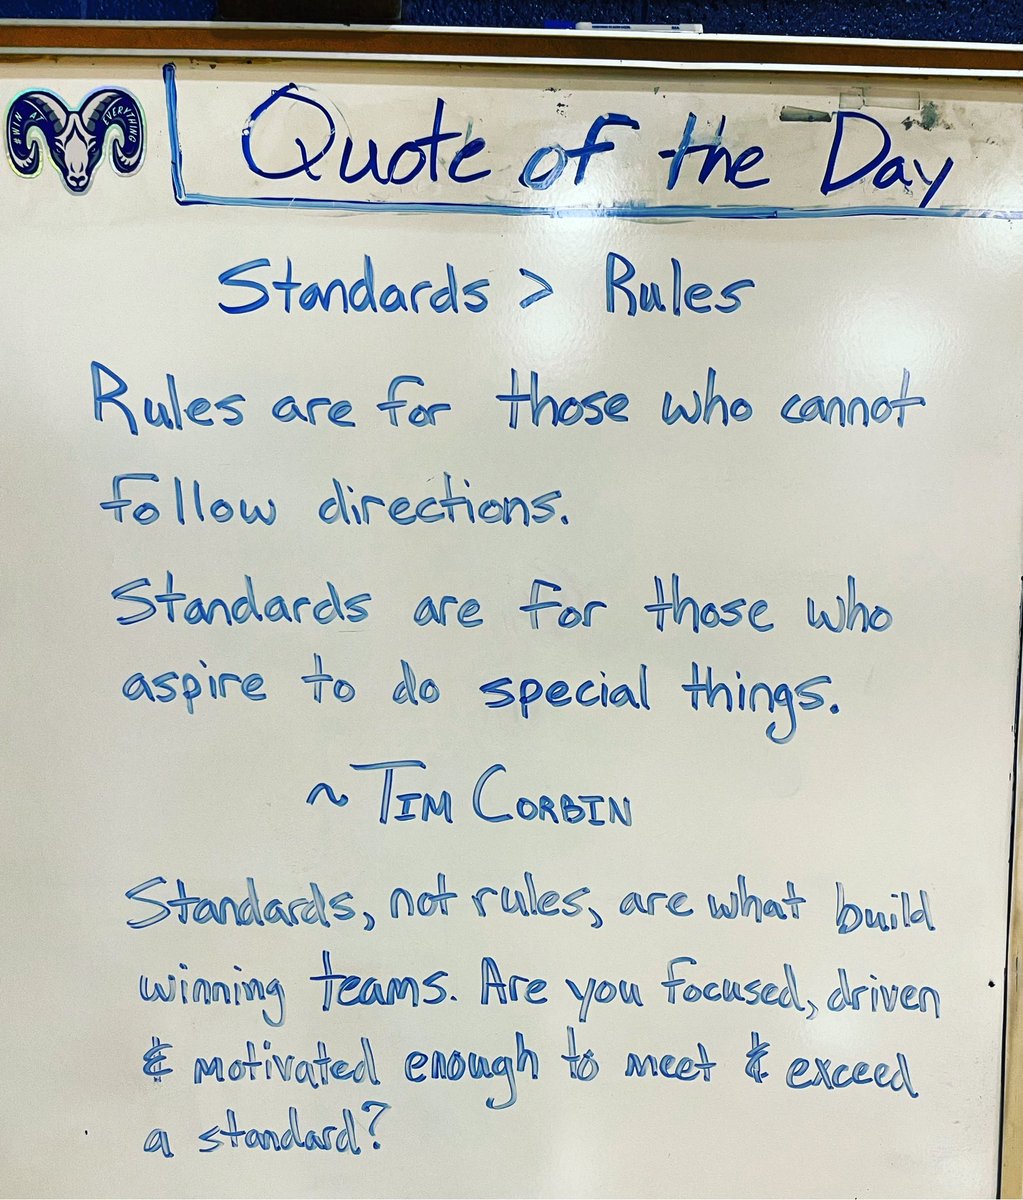 Meet and exceed the Standard. I’ve never been a fan of ‘rules’. You give little kids rules because they lack the maturity to follow directions. 

Standards are expectations. You CHOOSE what to do. You’re expected to meet them if you desire a specific result.